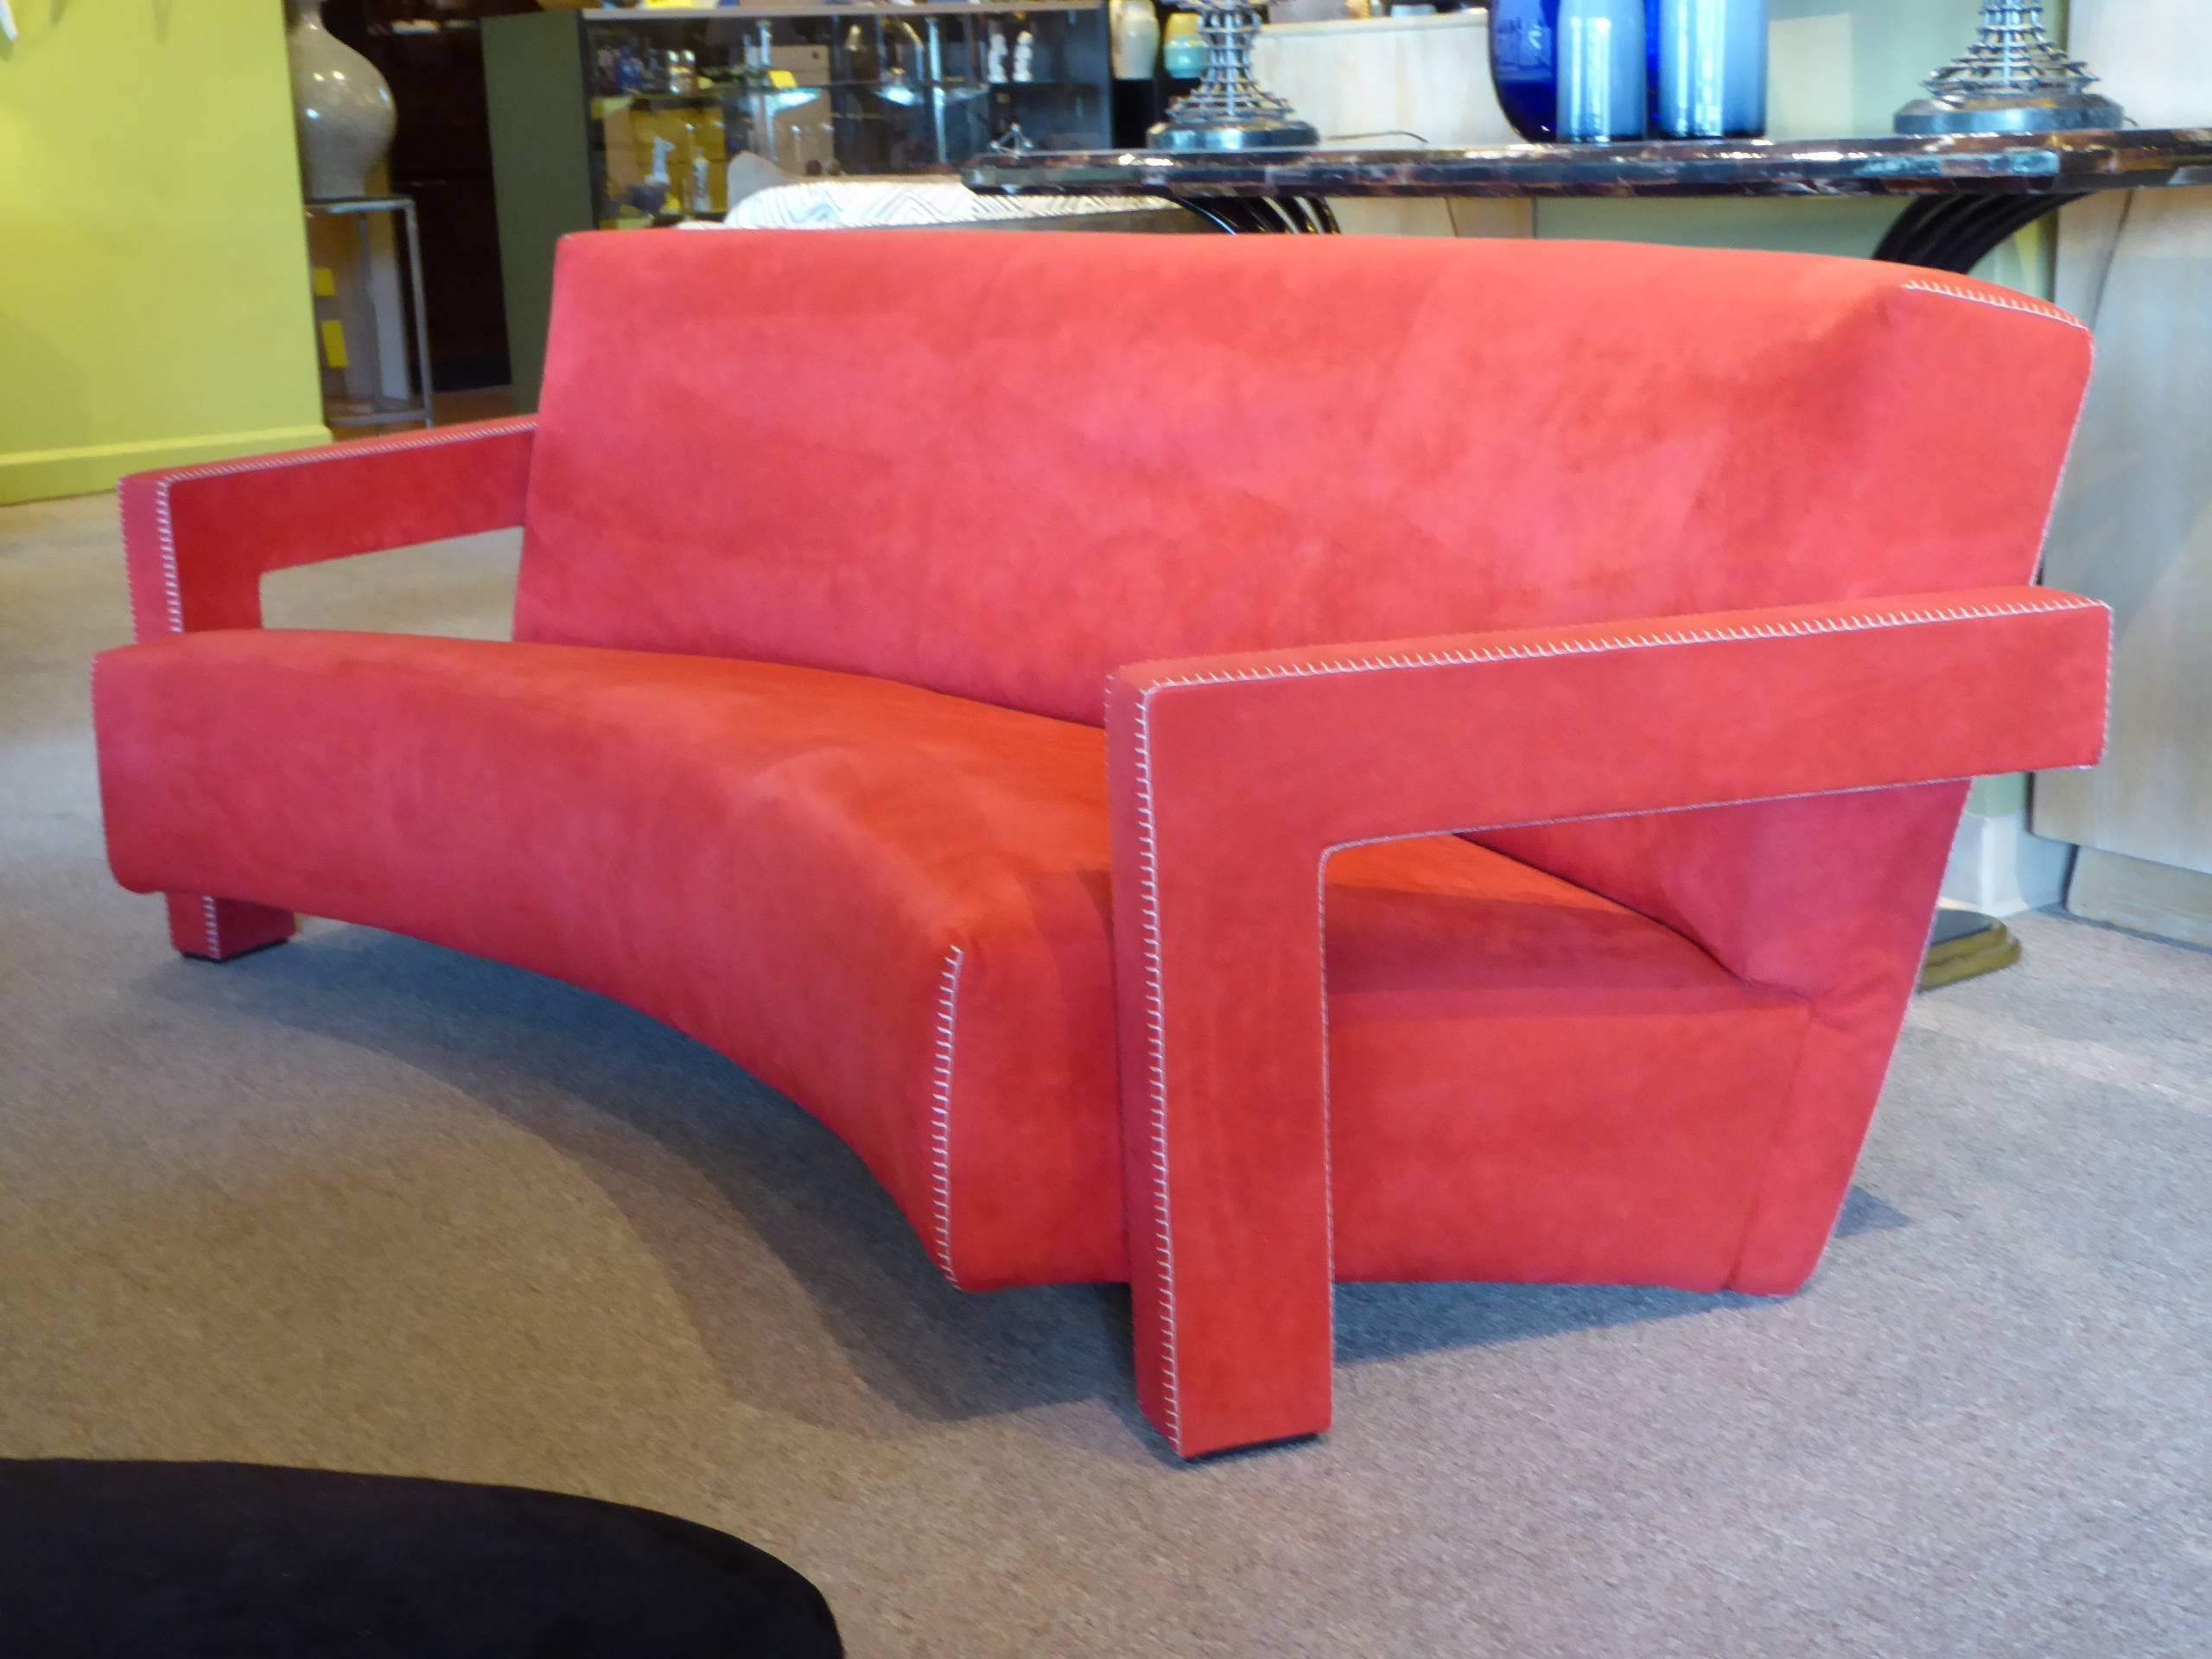 Noted Dutch architect and furniture designer Gerrit Thomas Rietveld designed this Utrecht sofa in 1935, featuring a wonderful curved Silhouette. Cassina in 1988, on the occasion of the 100th anniversary of his birth, re-issued the design. Here in a